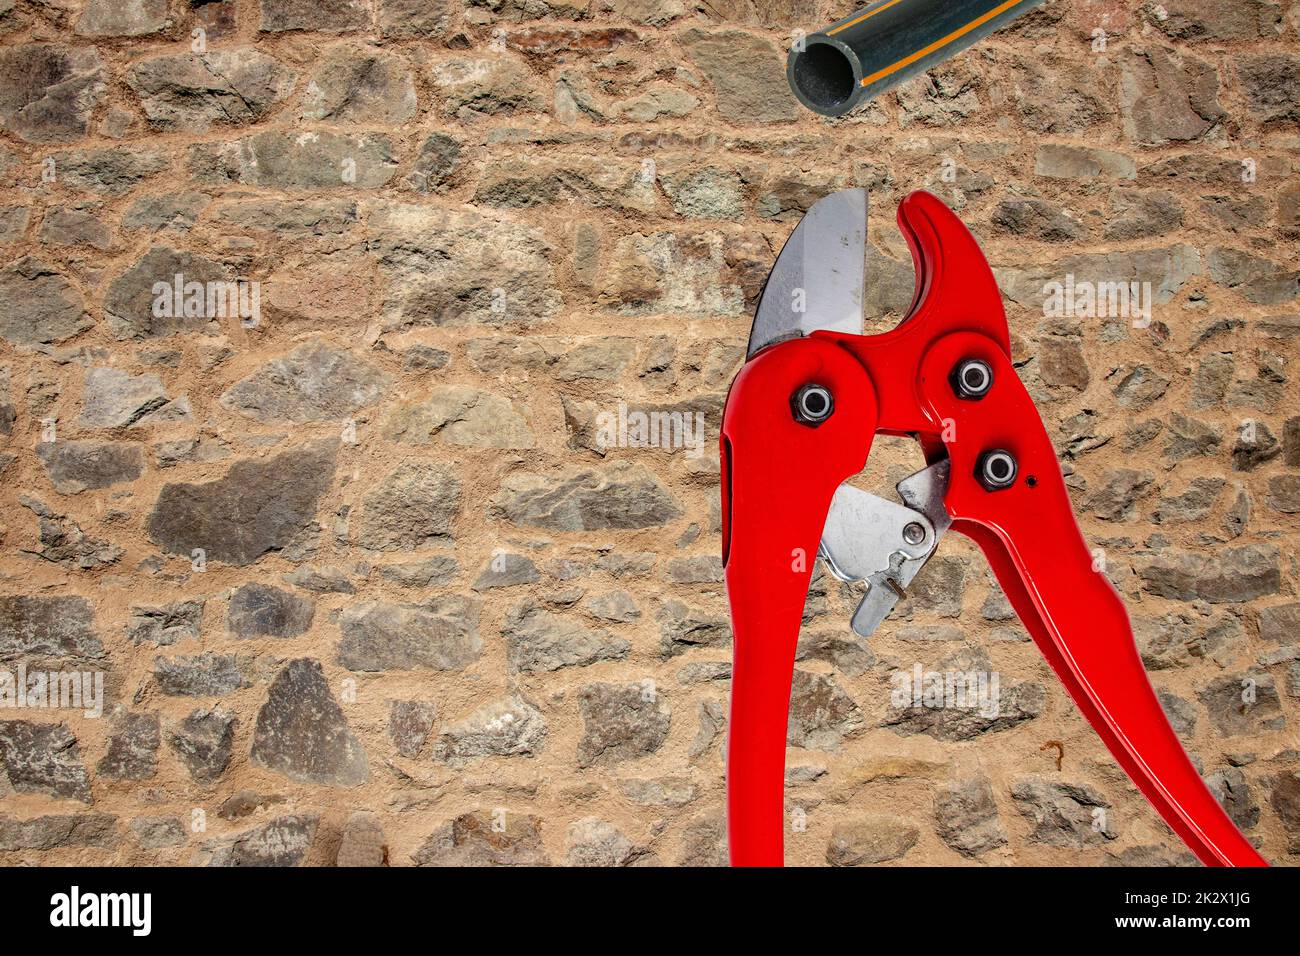 Plumber tools isolated. A red PVC pipe cutter for cutting plastic pipes and a piece of PE pressure pipe or water pipe over stone wall. Space. Craftsman tools. Stock Photo